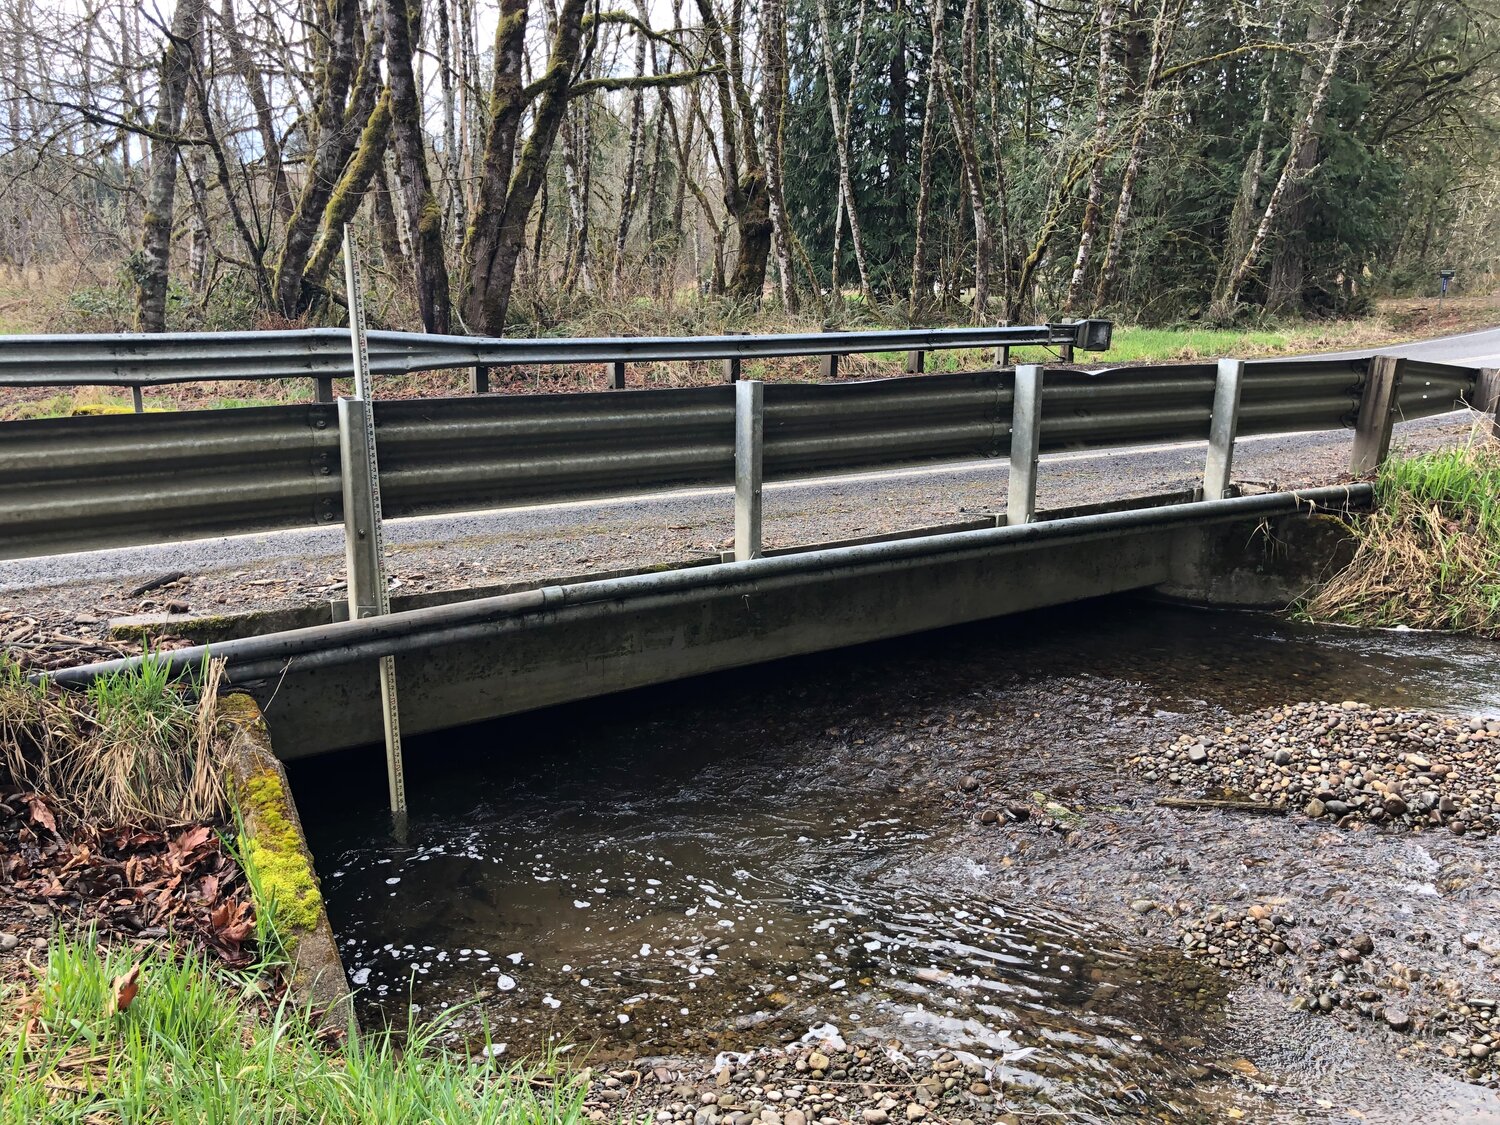 The Lewis County Public Works Department received $495,750 to restore a fish passage in the Blue Creek tributary, which is used by Chinook, chum and coho salmon and steelhead trout. The county will use the funds to develop plans to improve the Cowlitz Trout Hatchery, remove a bridge and grade the channel.